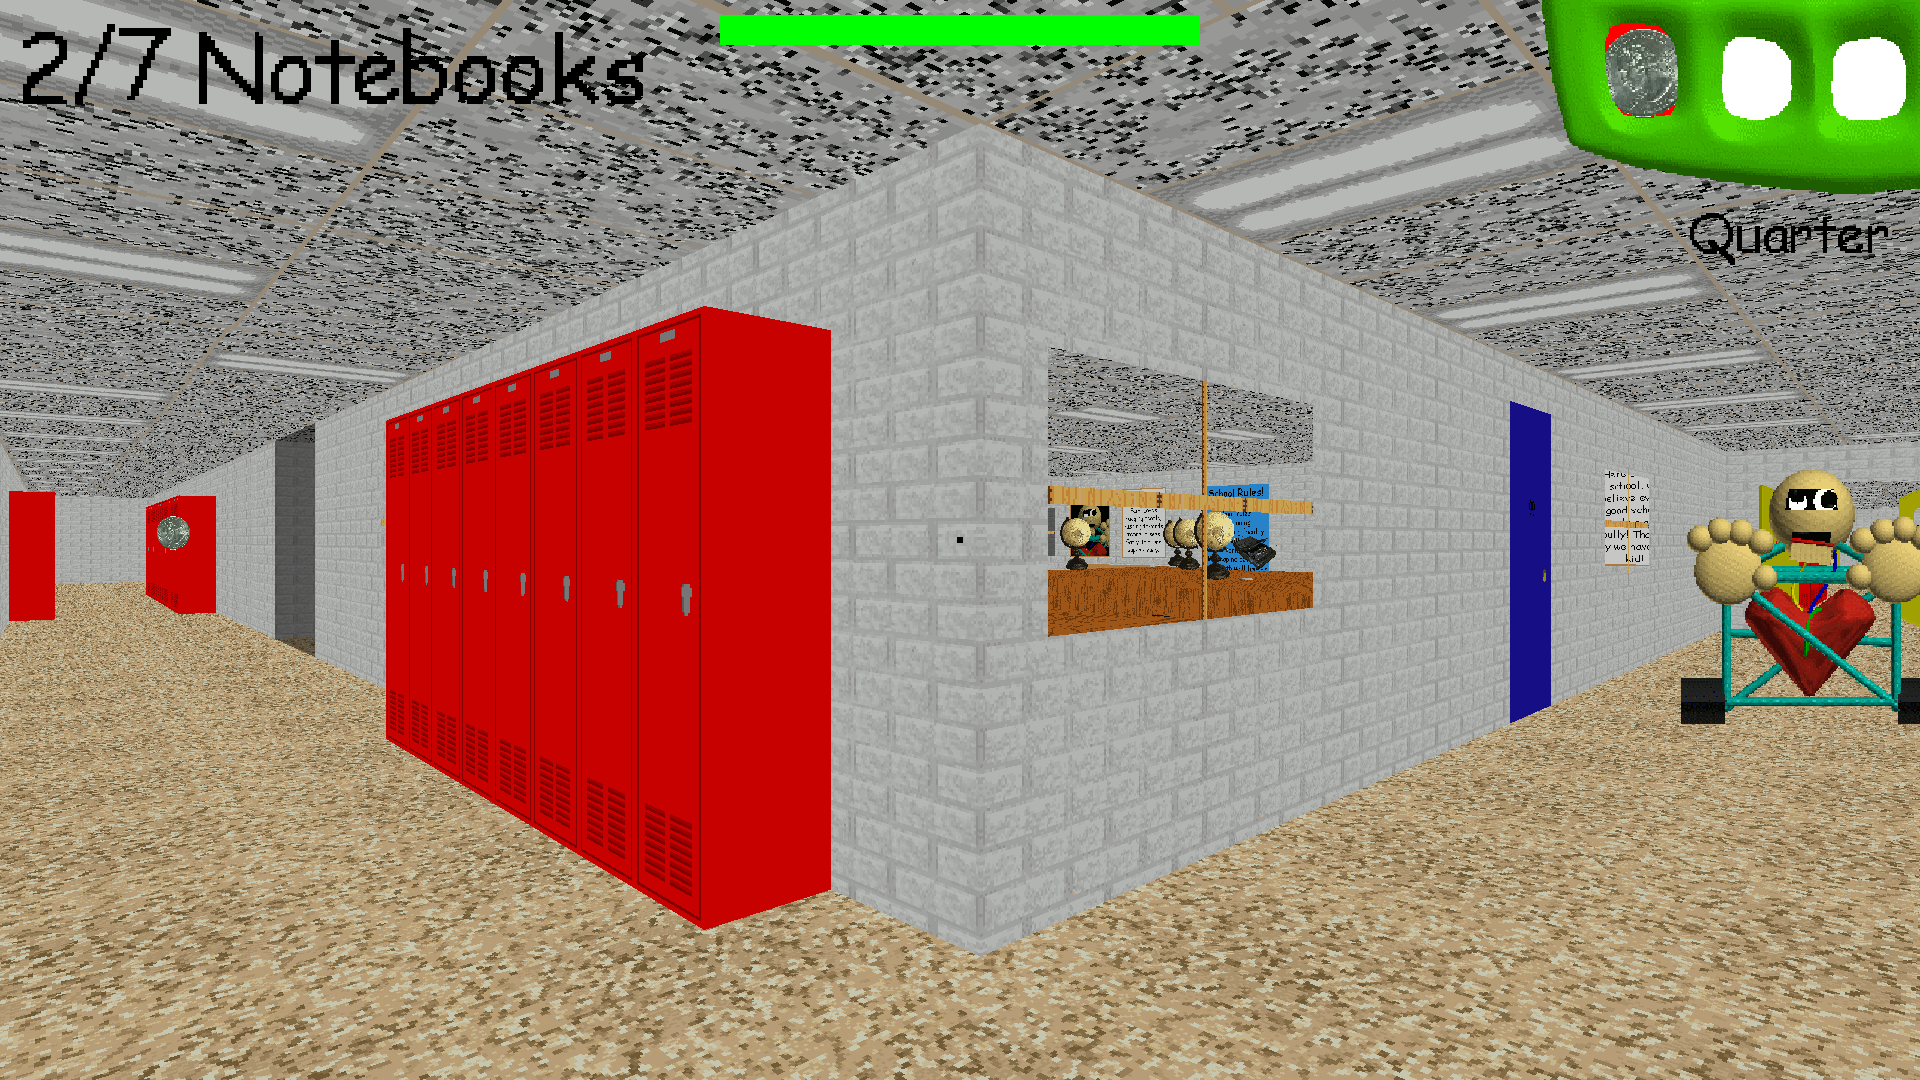 Baldi S Basics In Education And Learning By Basically Games For